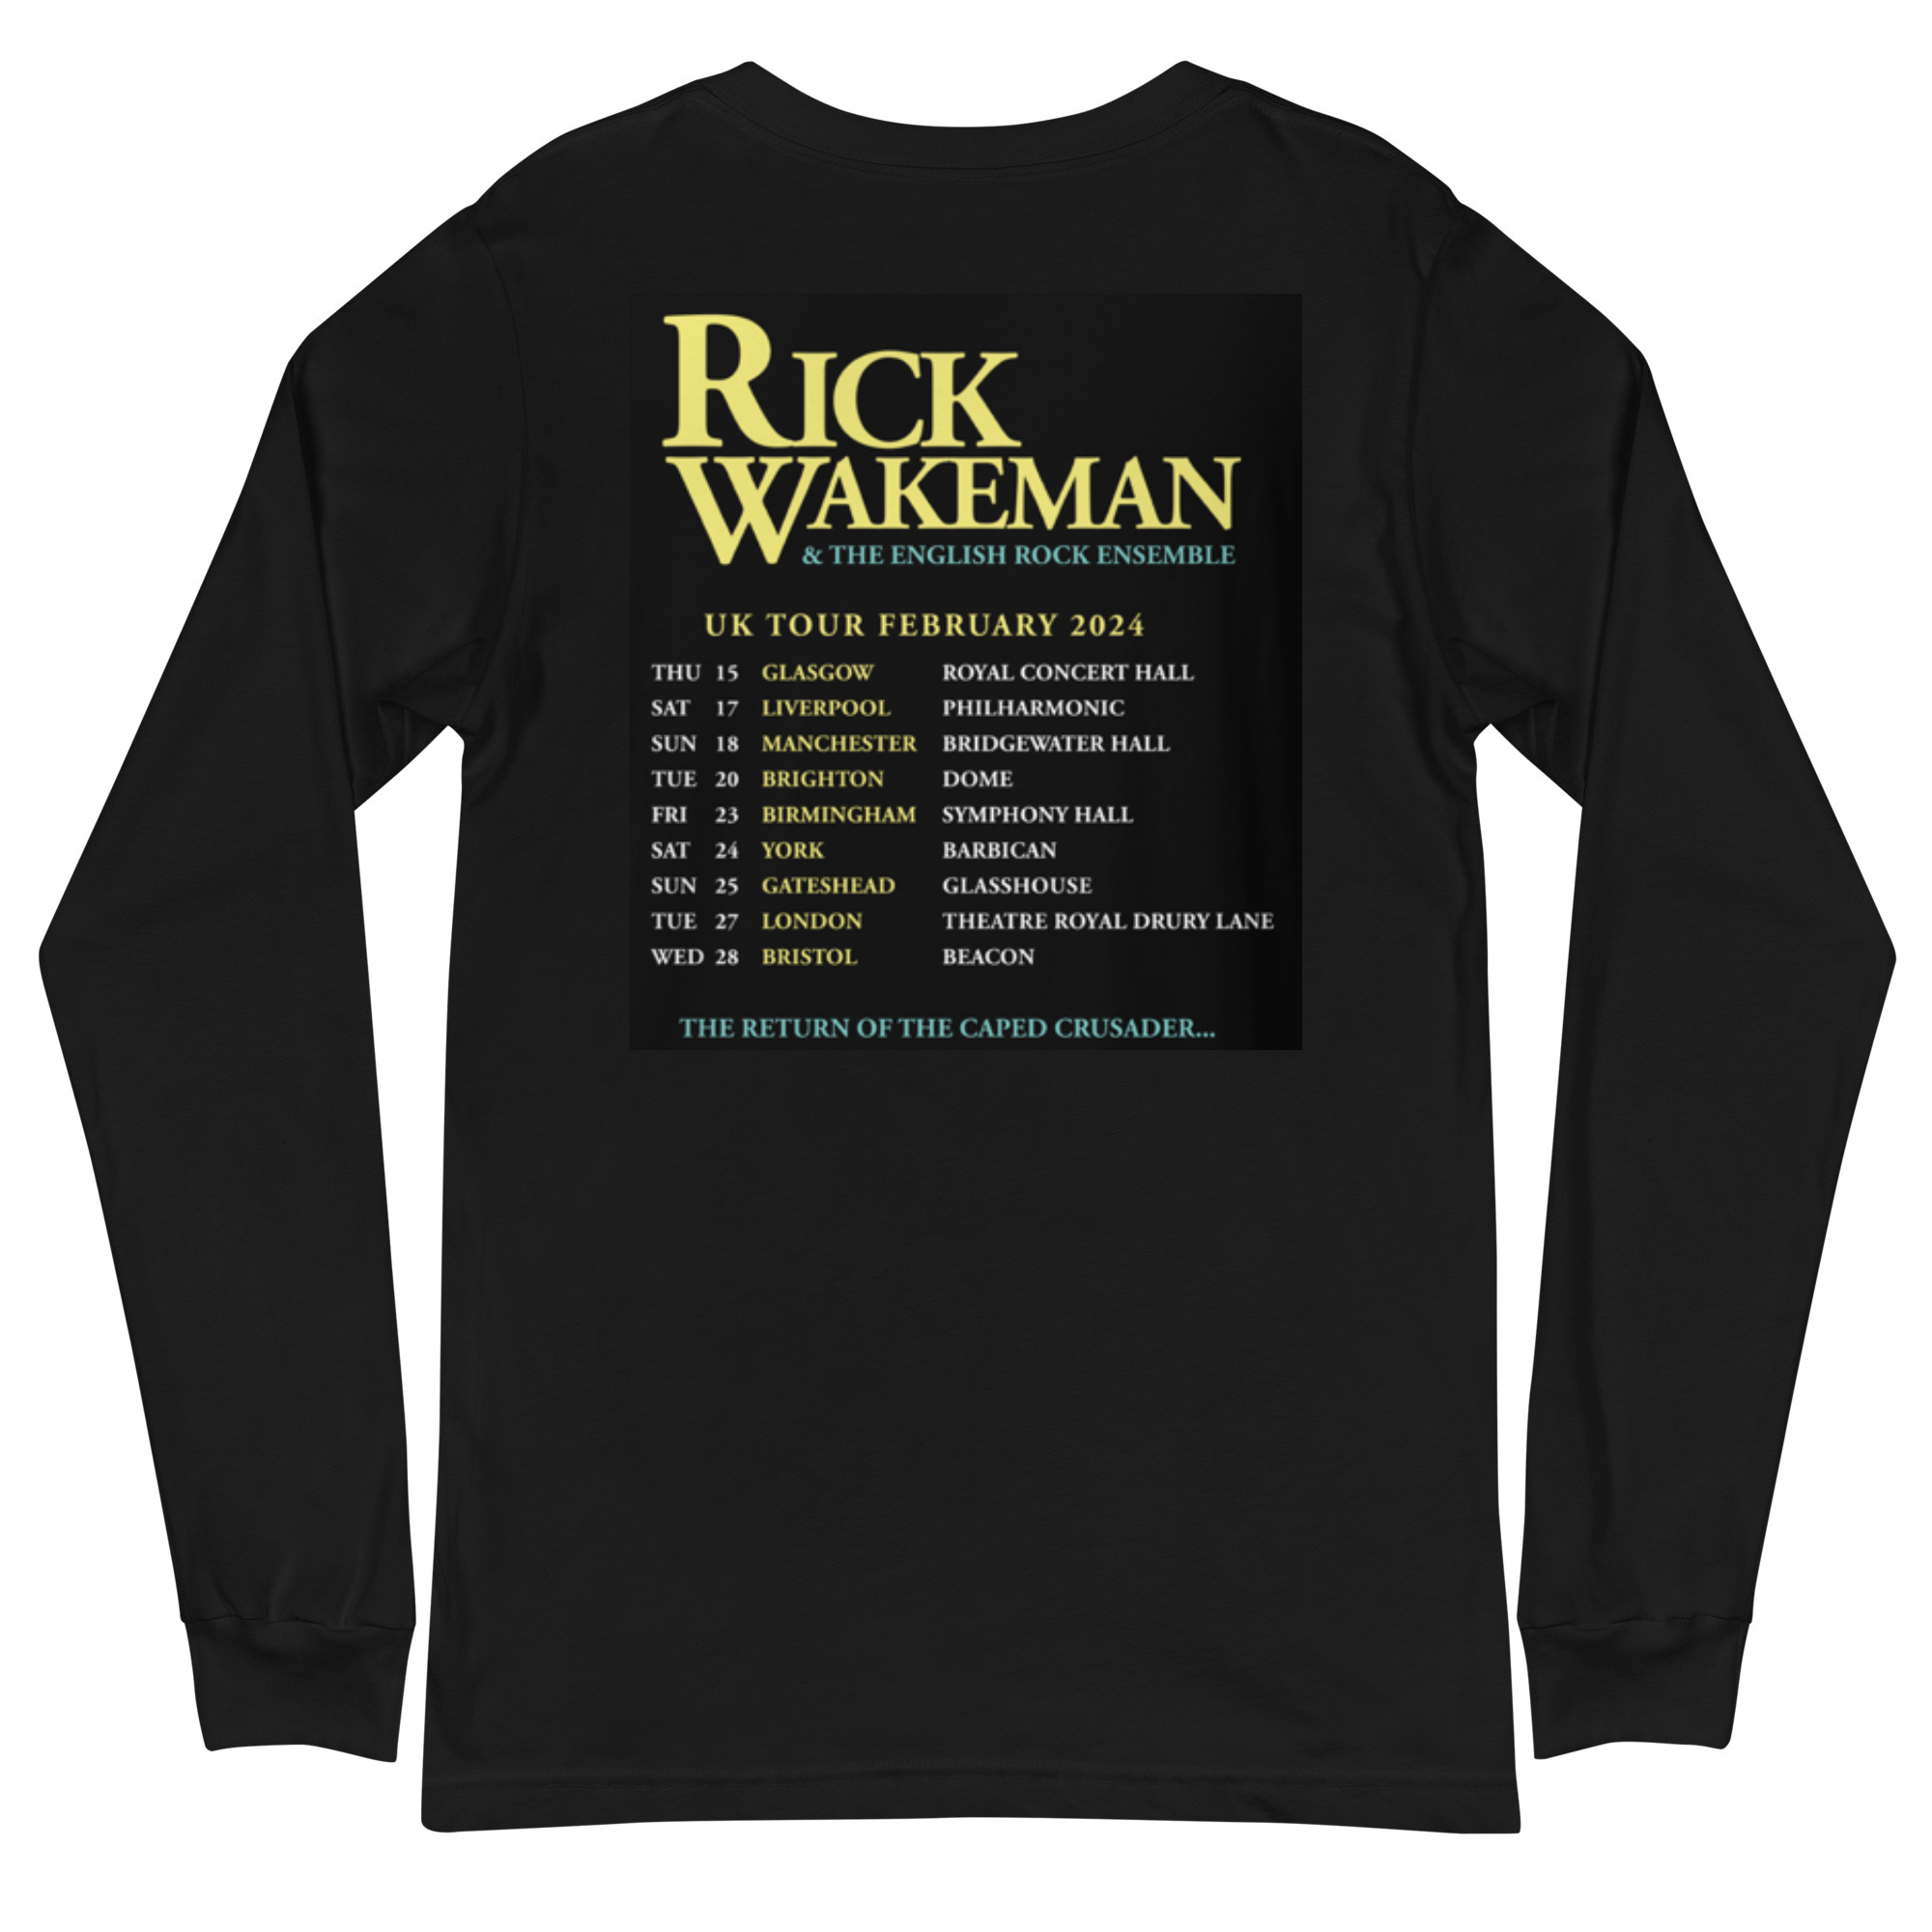 Return Of The Caped Crusader Long Sleeve Tour T-Shirt